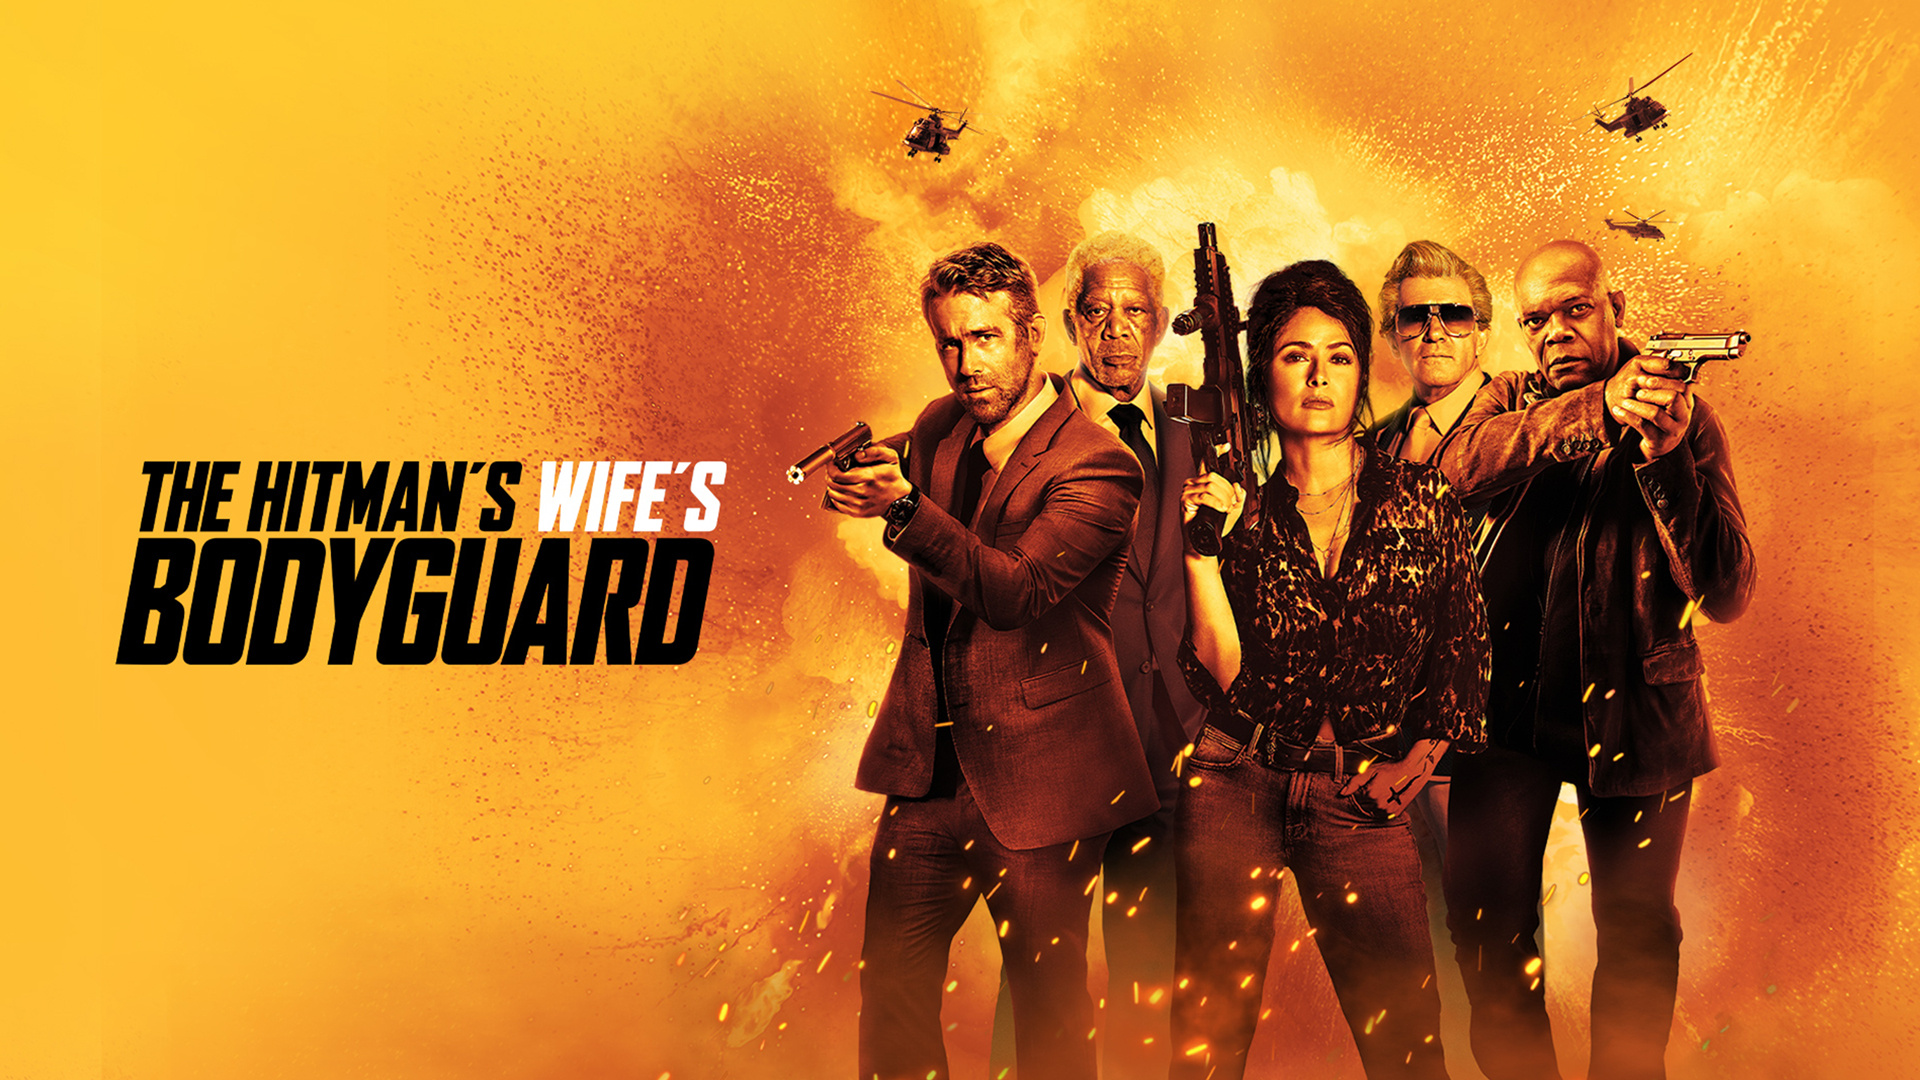 Hitmans Wifes Bodyguard: Screenplay by Tom O'Connor, Brandon Murphy, and Phillip Murphy. 1920x1080 Full HD Background.